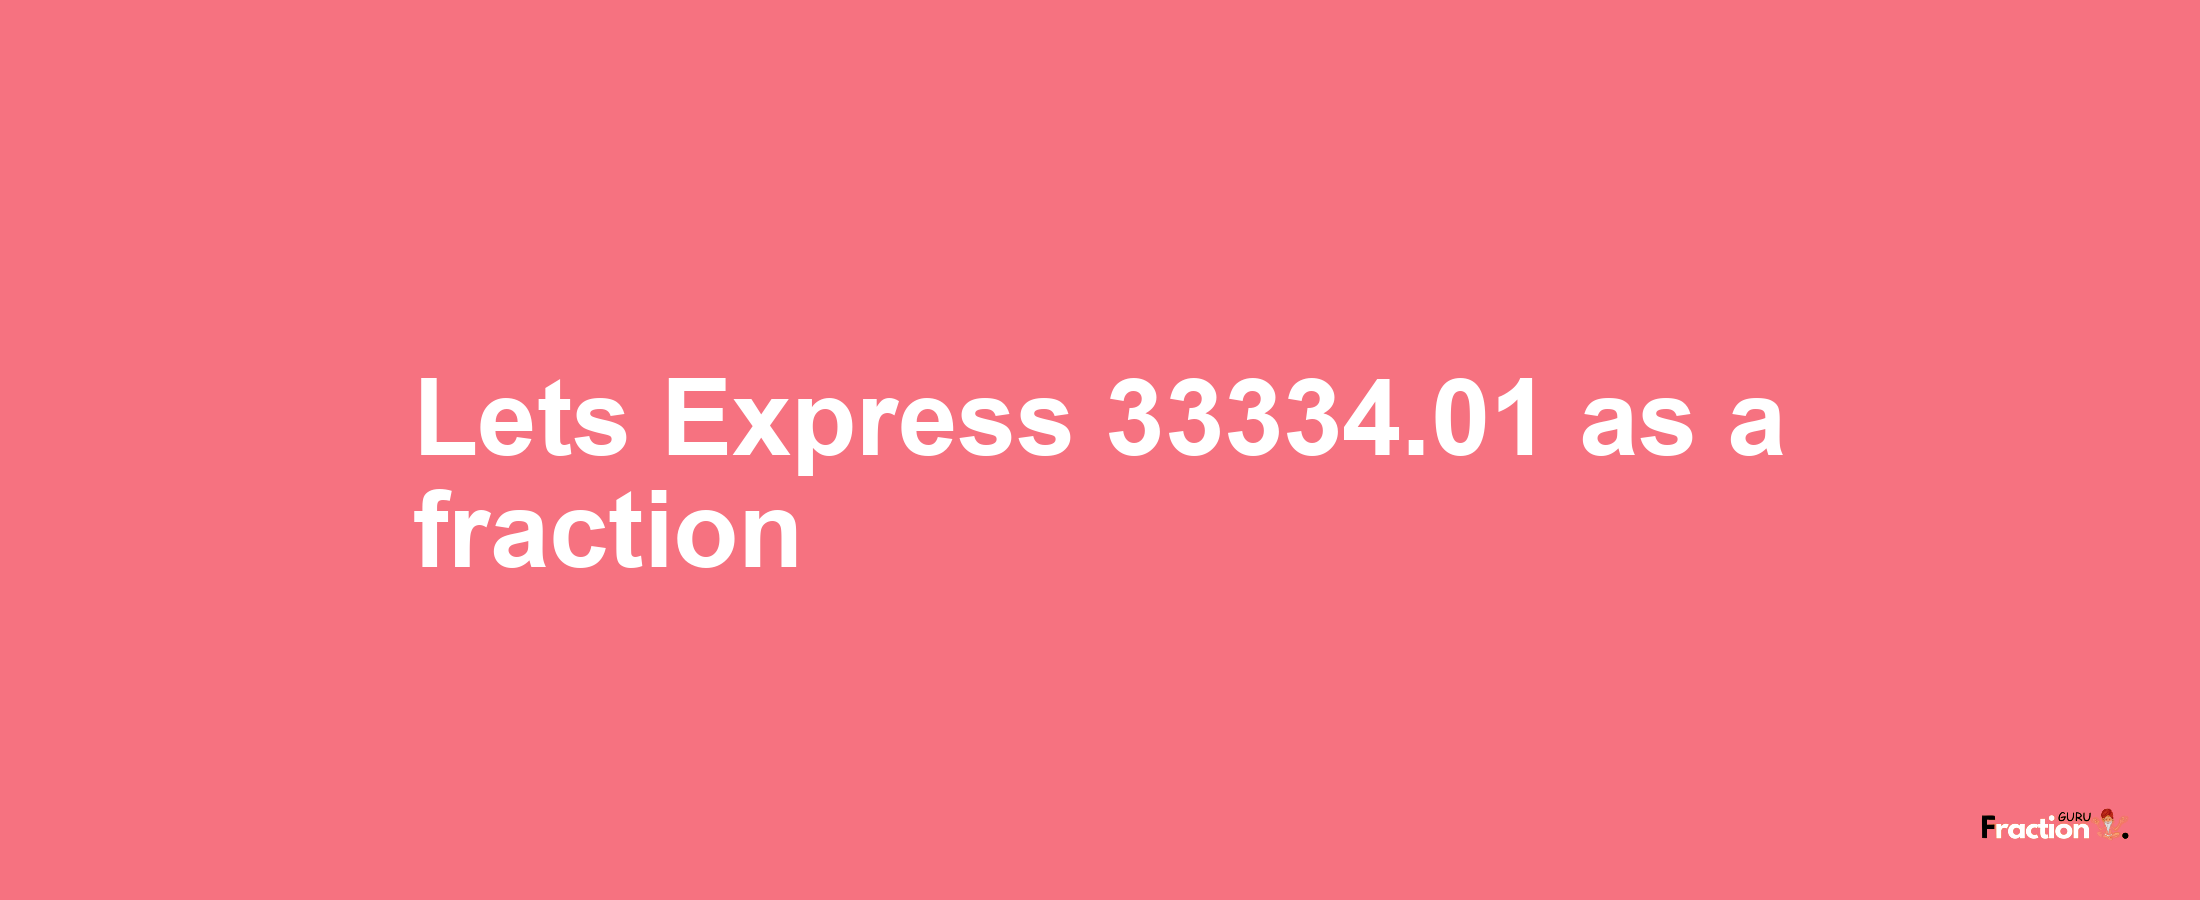 Lets Express 33334.01 as afraction